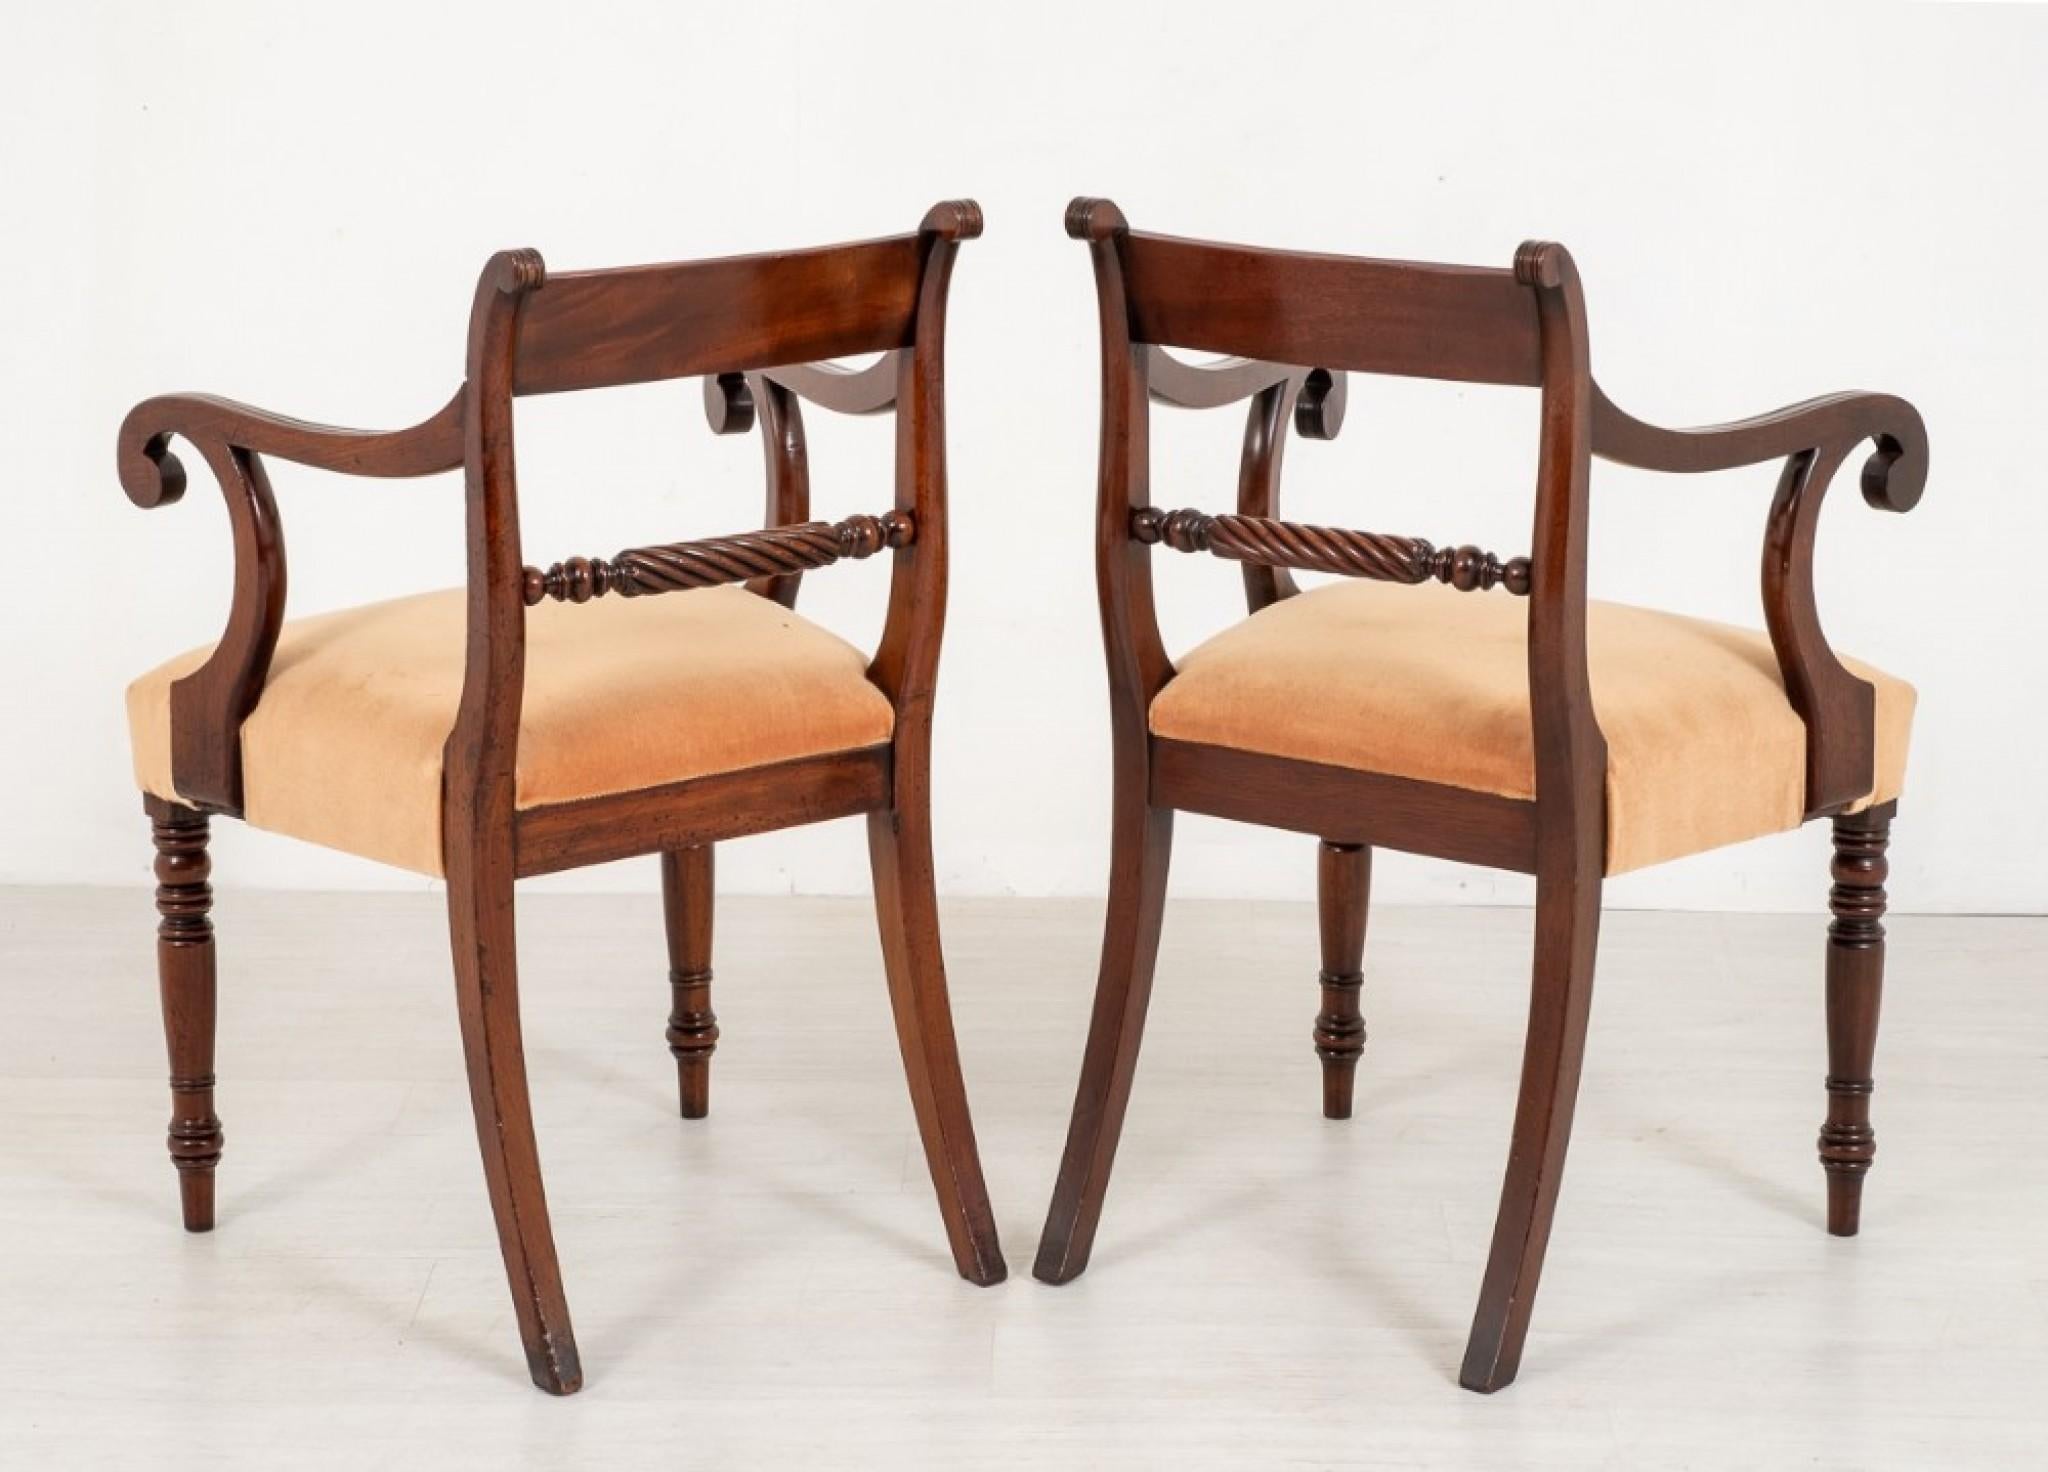 Pair of regency open arm chairs.
Having crisply ring turned front legs and swept sabre style back legs.
Featuring typical reeded regency shaped arm supports and elegant arms.
The top rails having highly figured timbers.
The lower rails being of